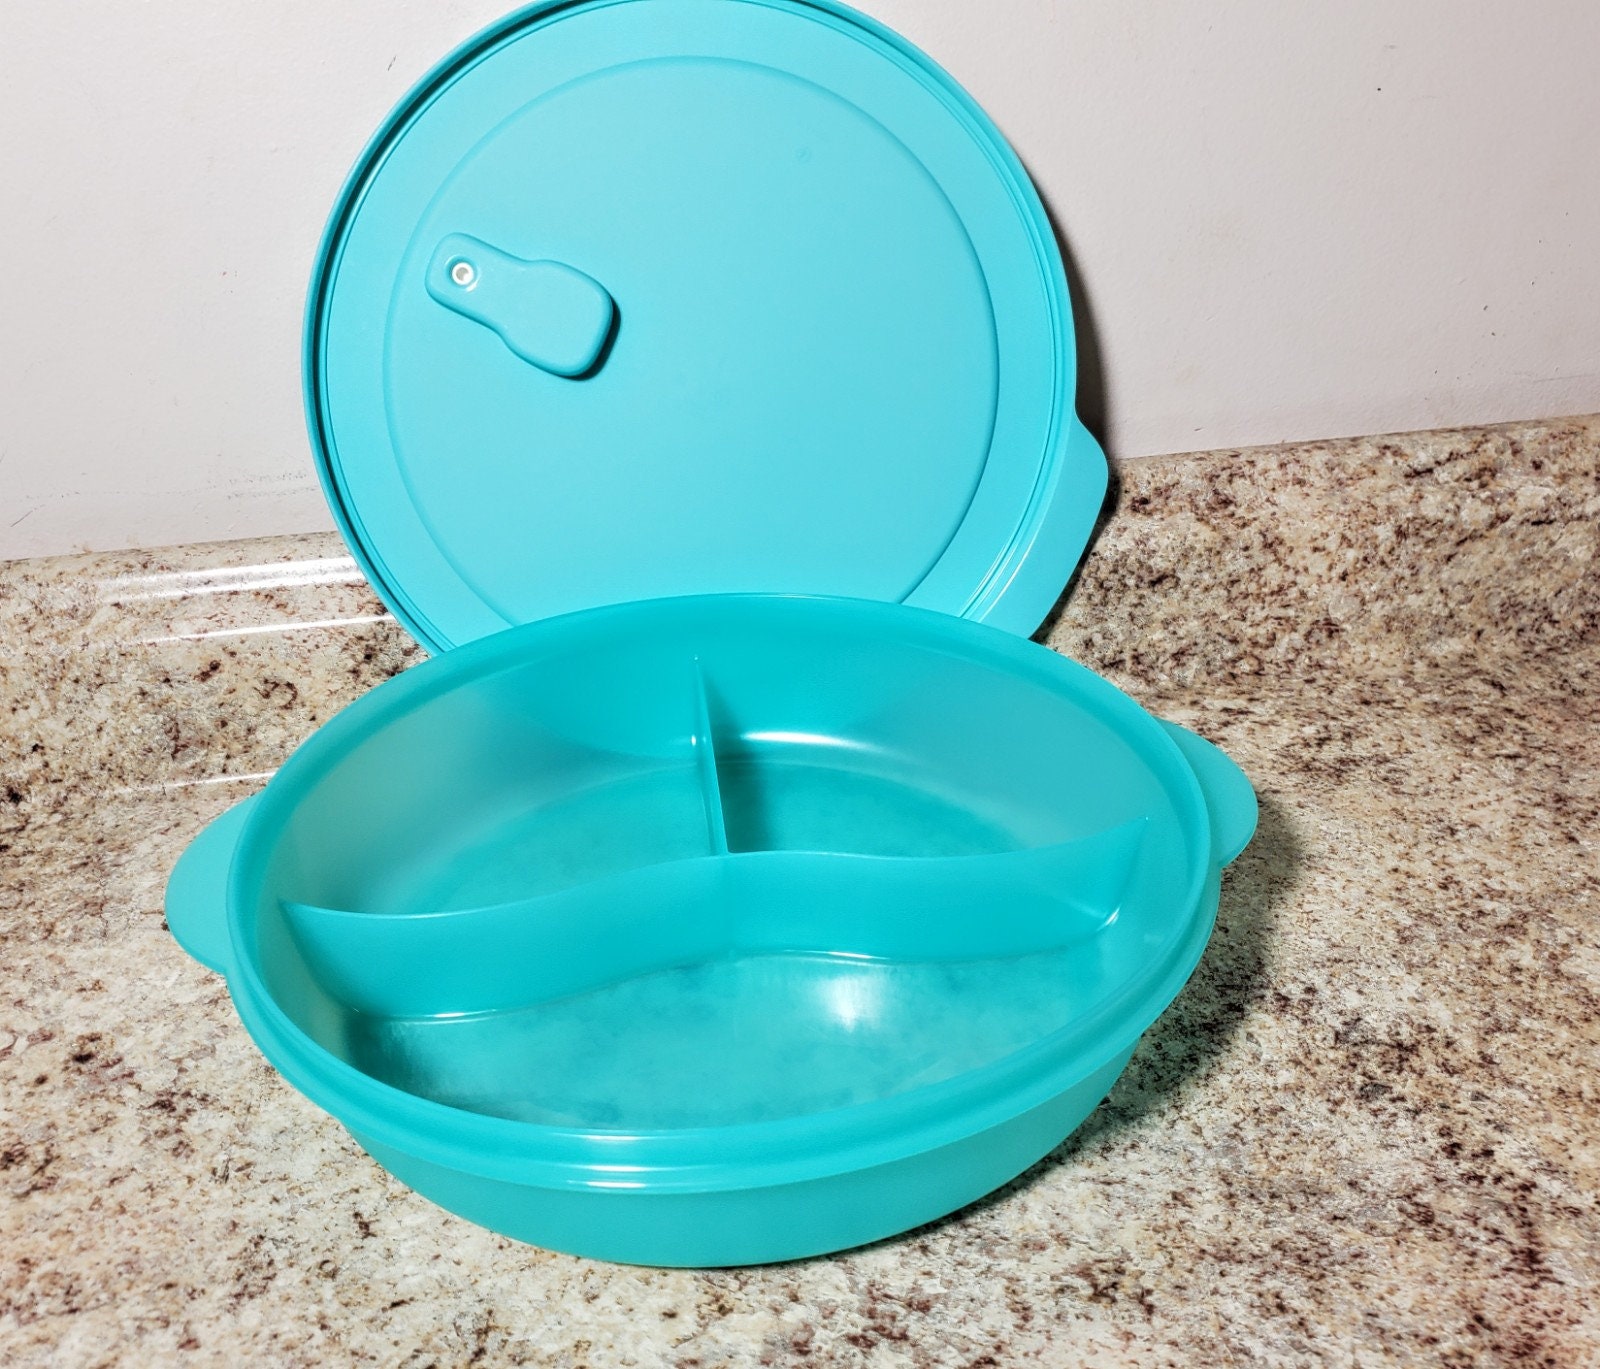 CrystalWave® PLUS Divided Dish